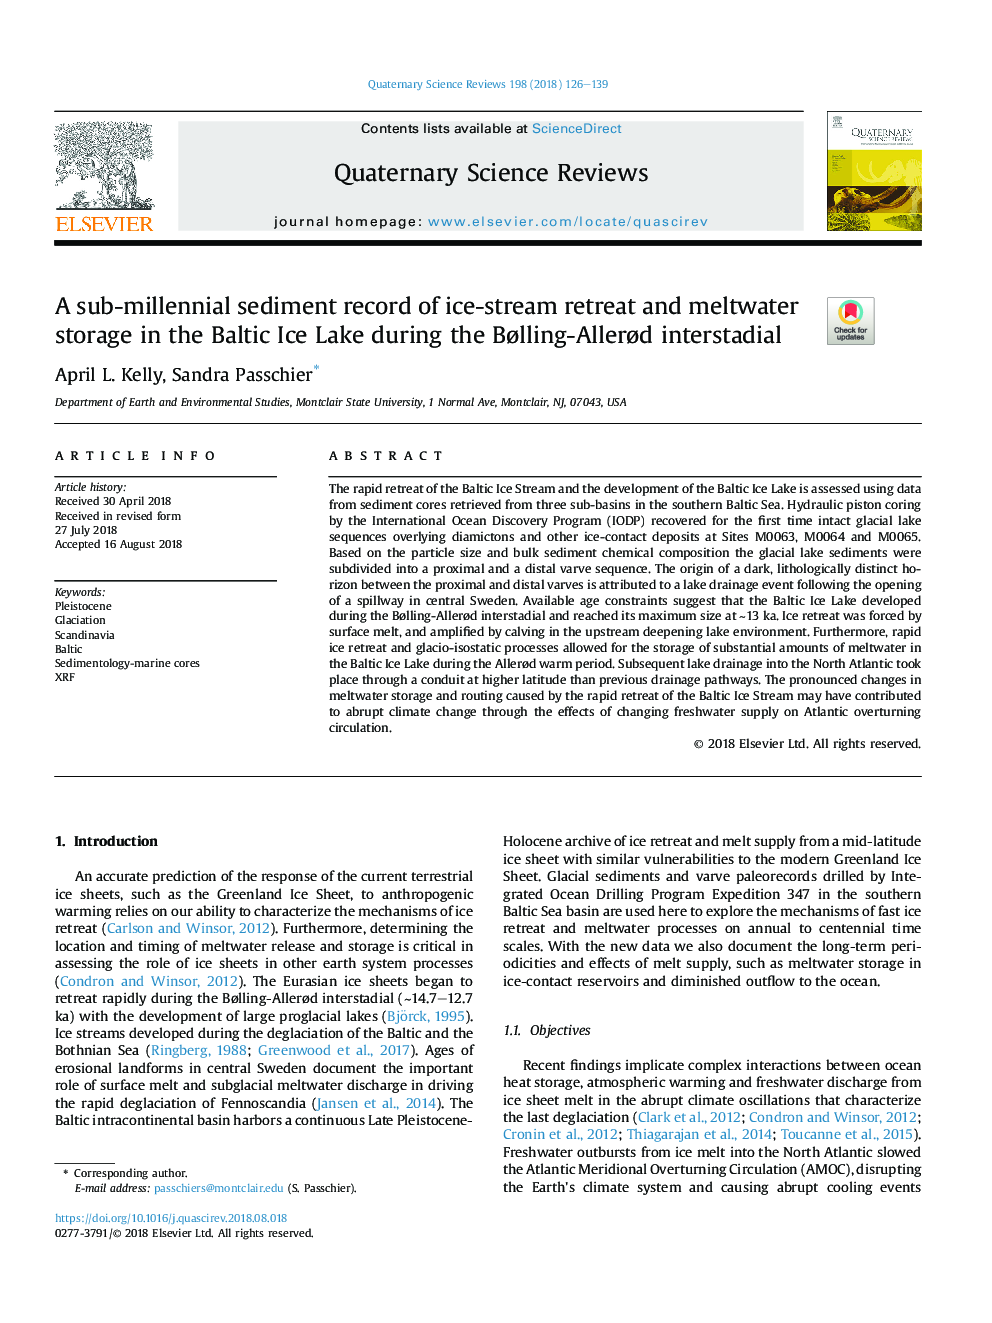 A sub-millennial sediment record of ice-stream retreat and meltwater storage in the Baltic Ice Lake during the BÃ¸lling-AllerÃ¸d interstadial